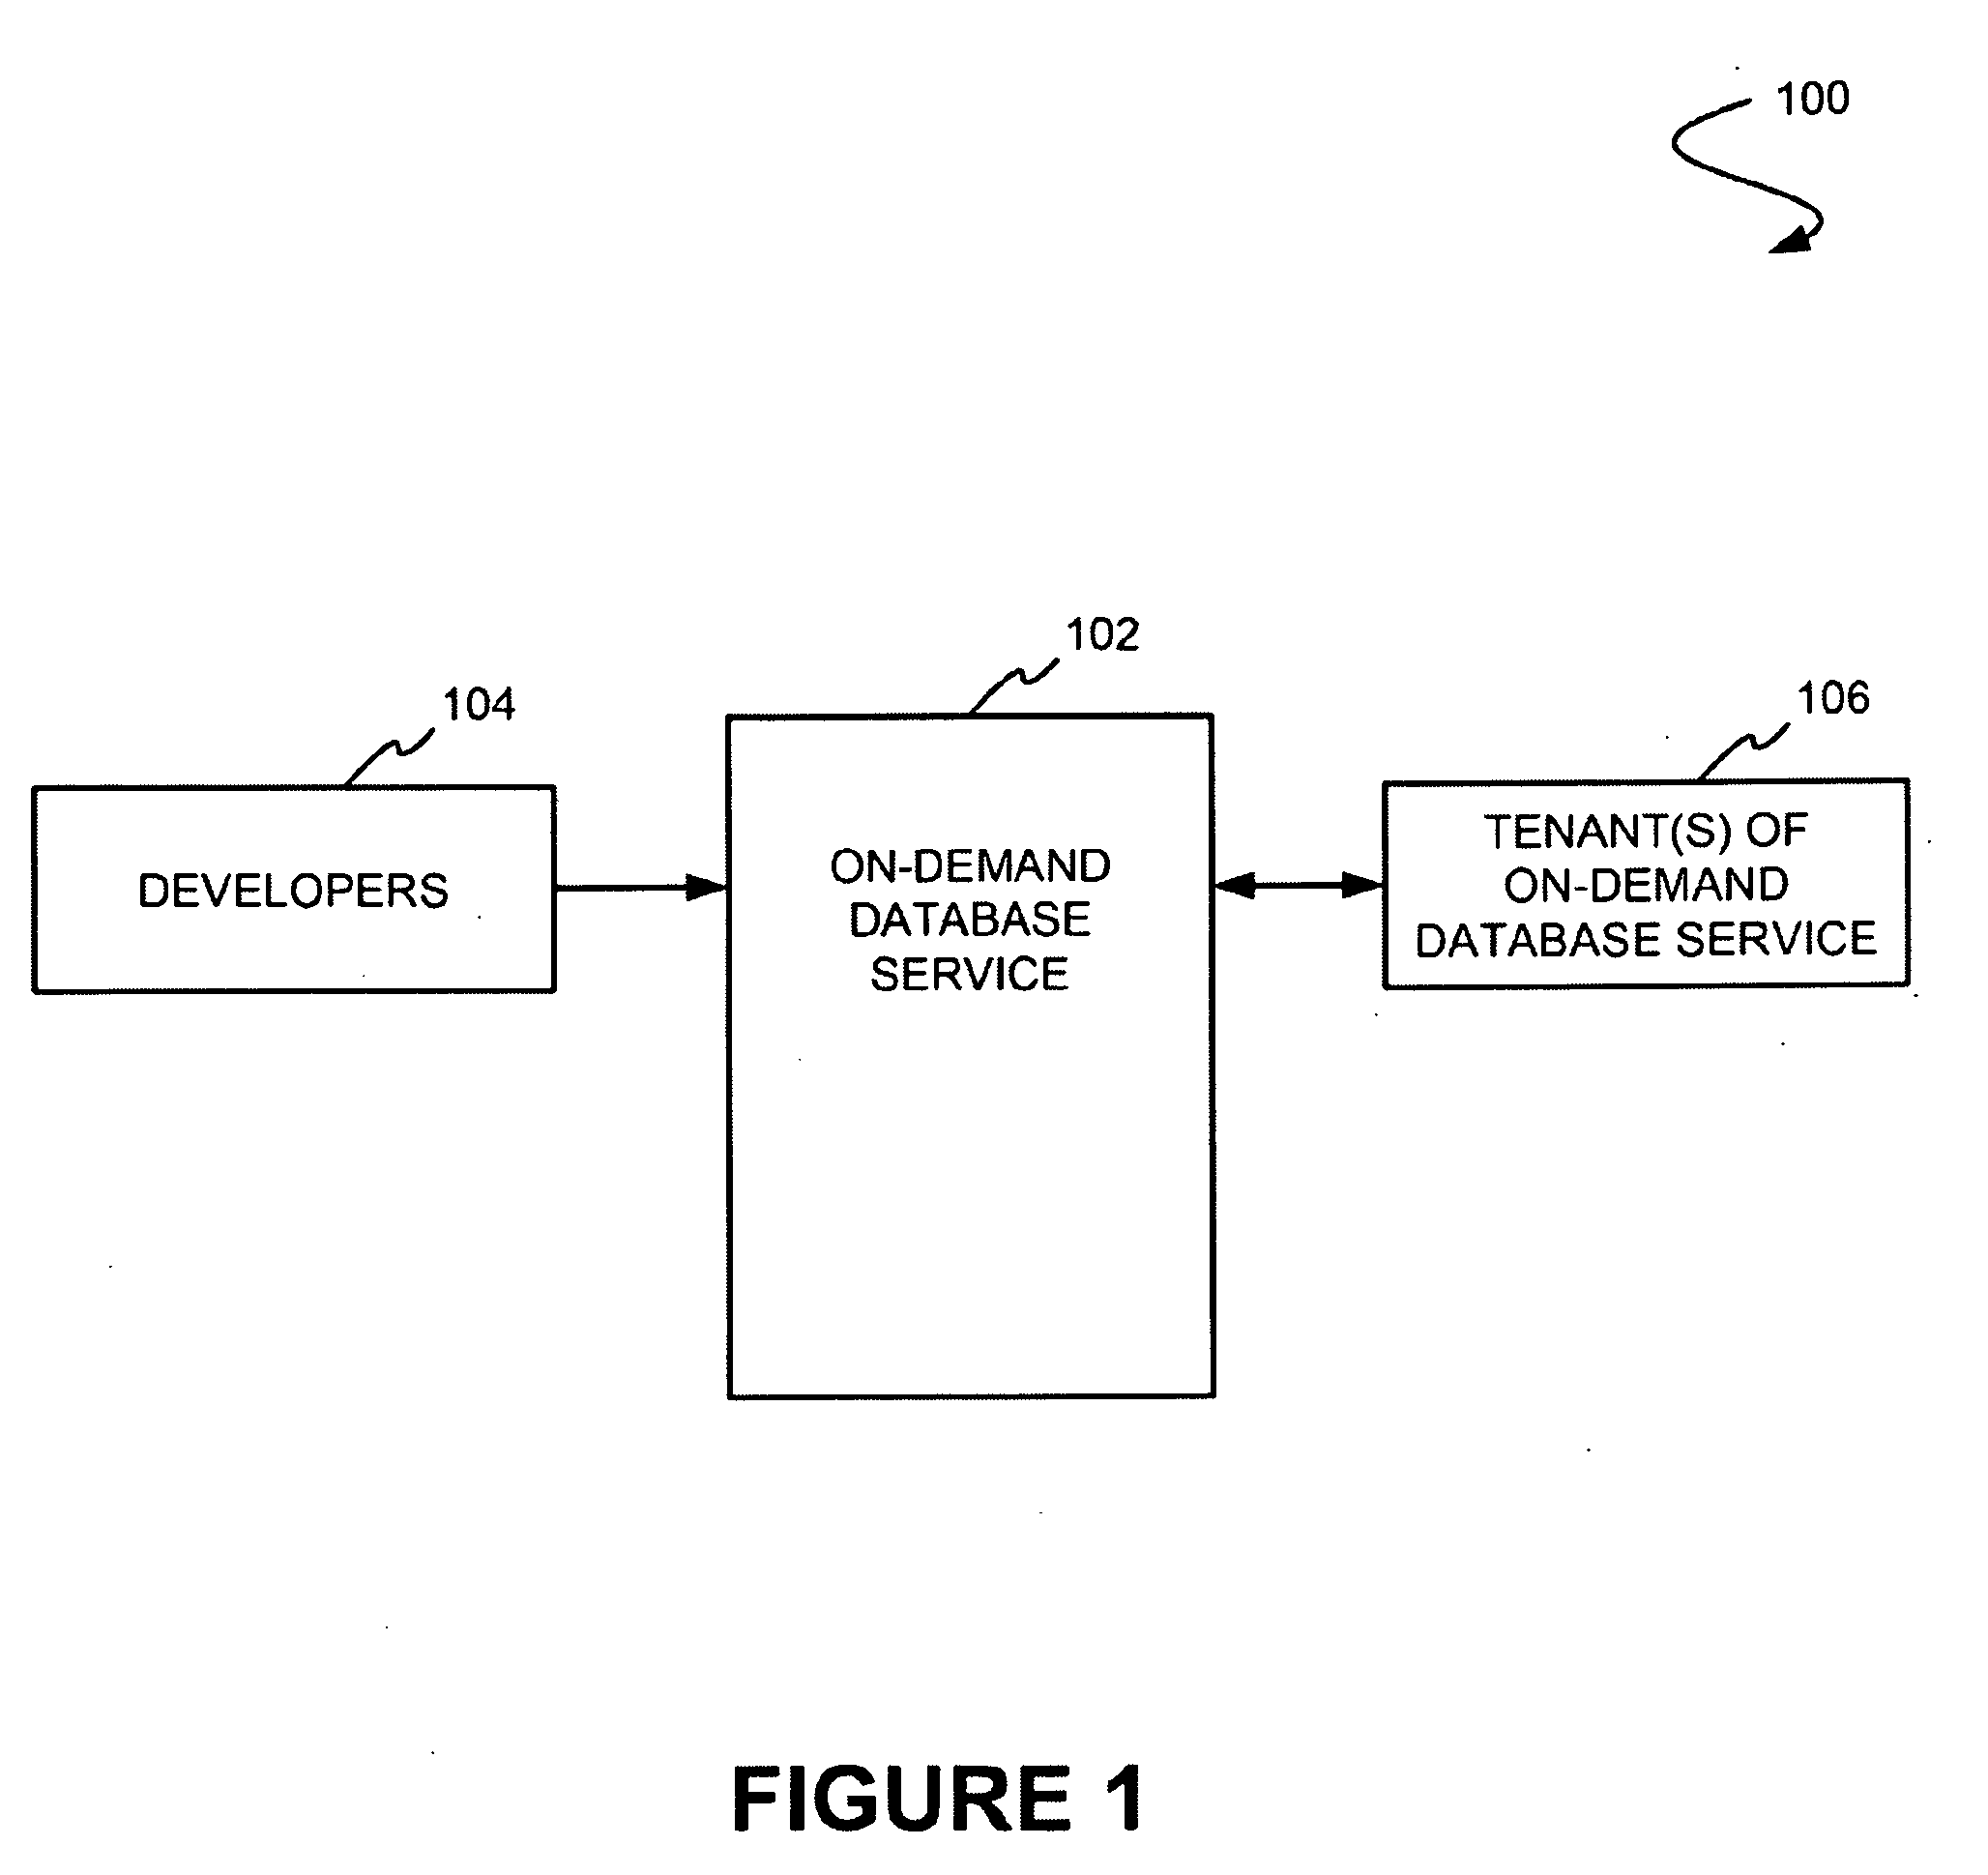 On-demand database service system and method for determining whether a developed application will operate properly with at least one other application